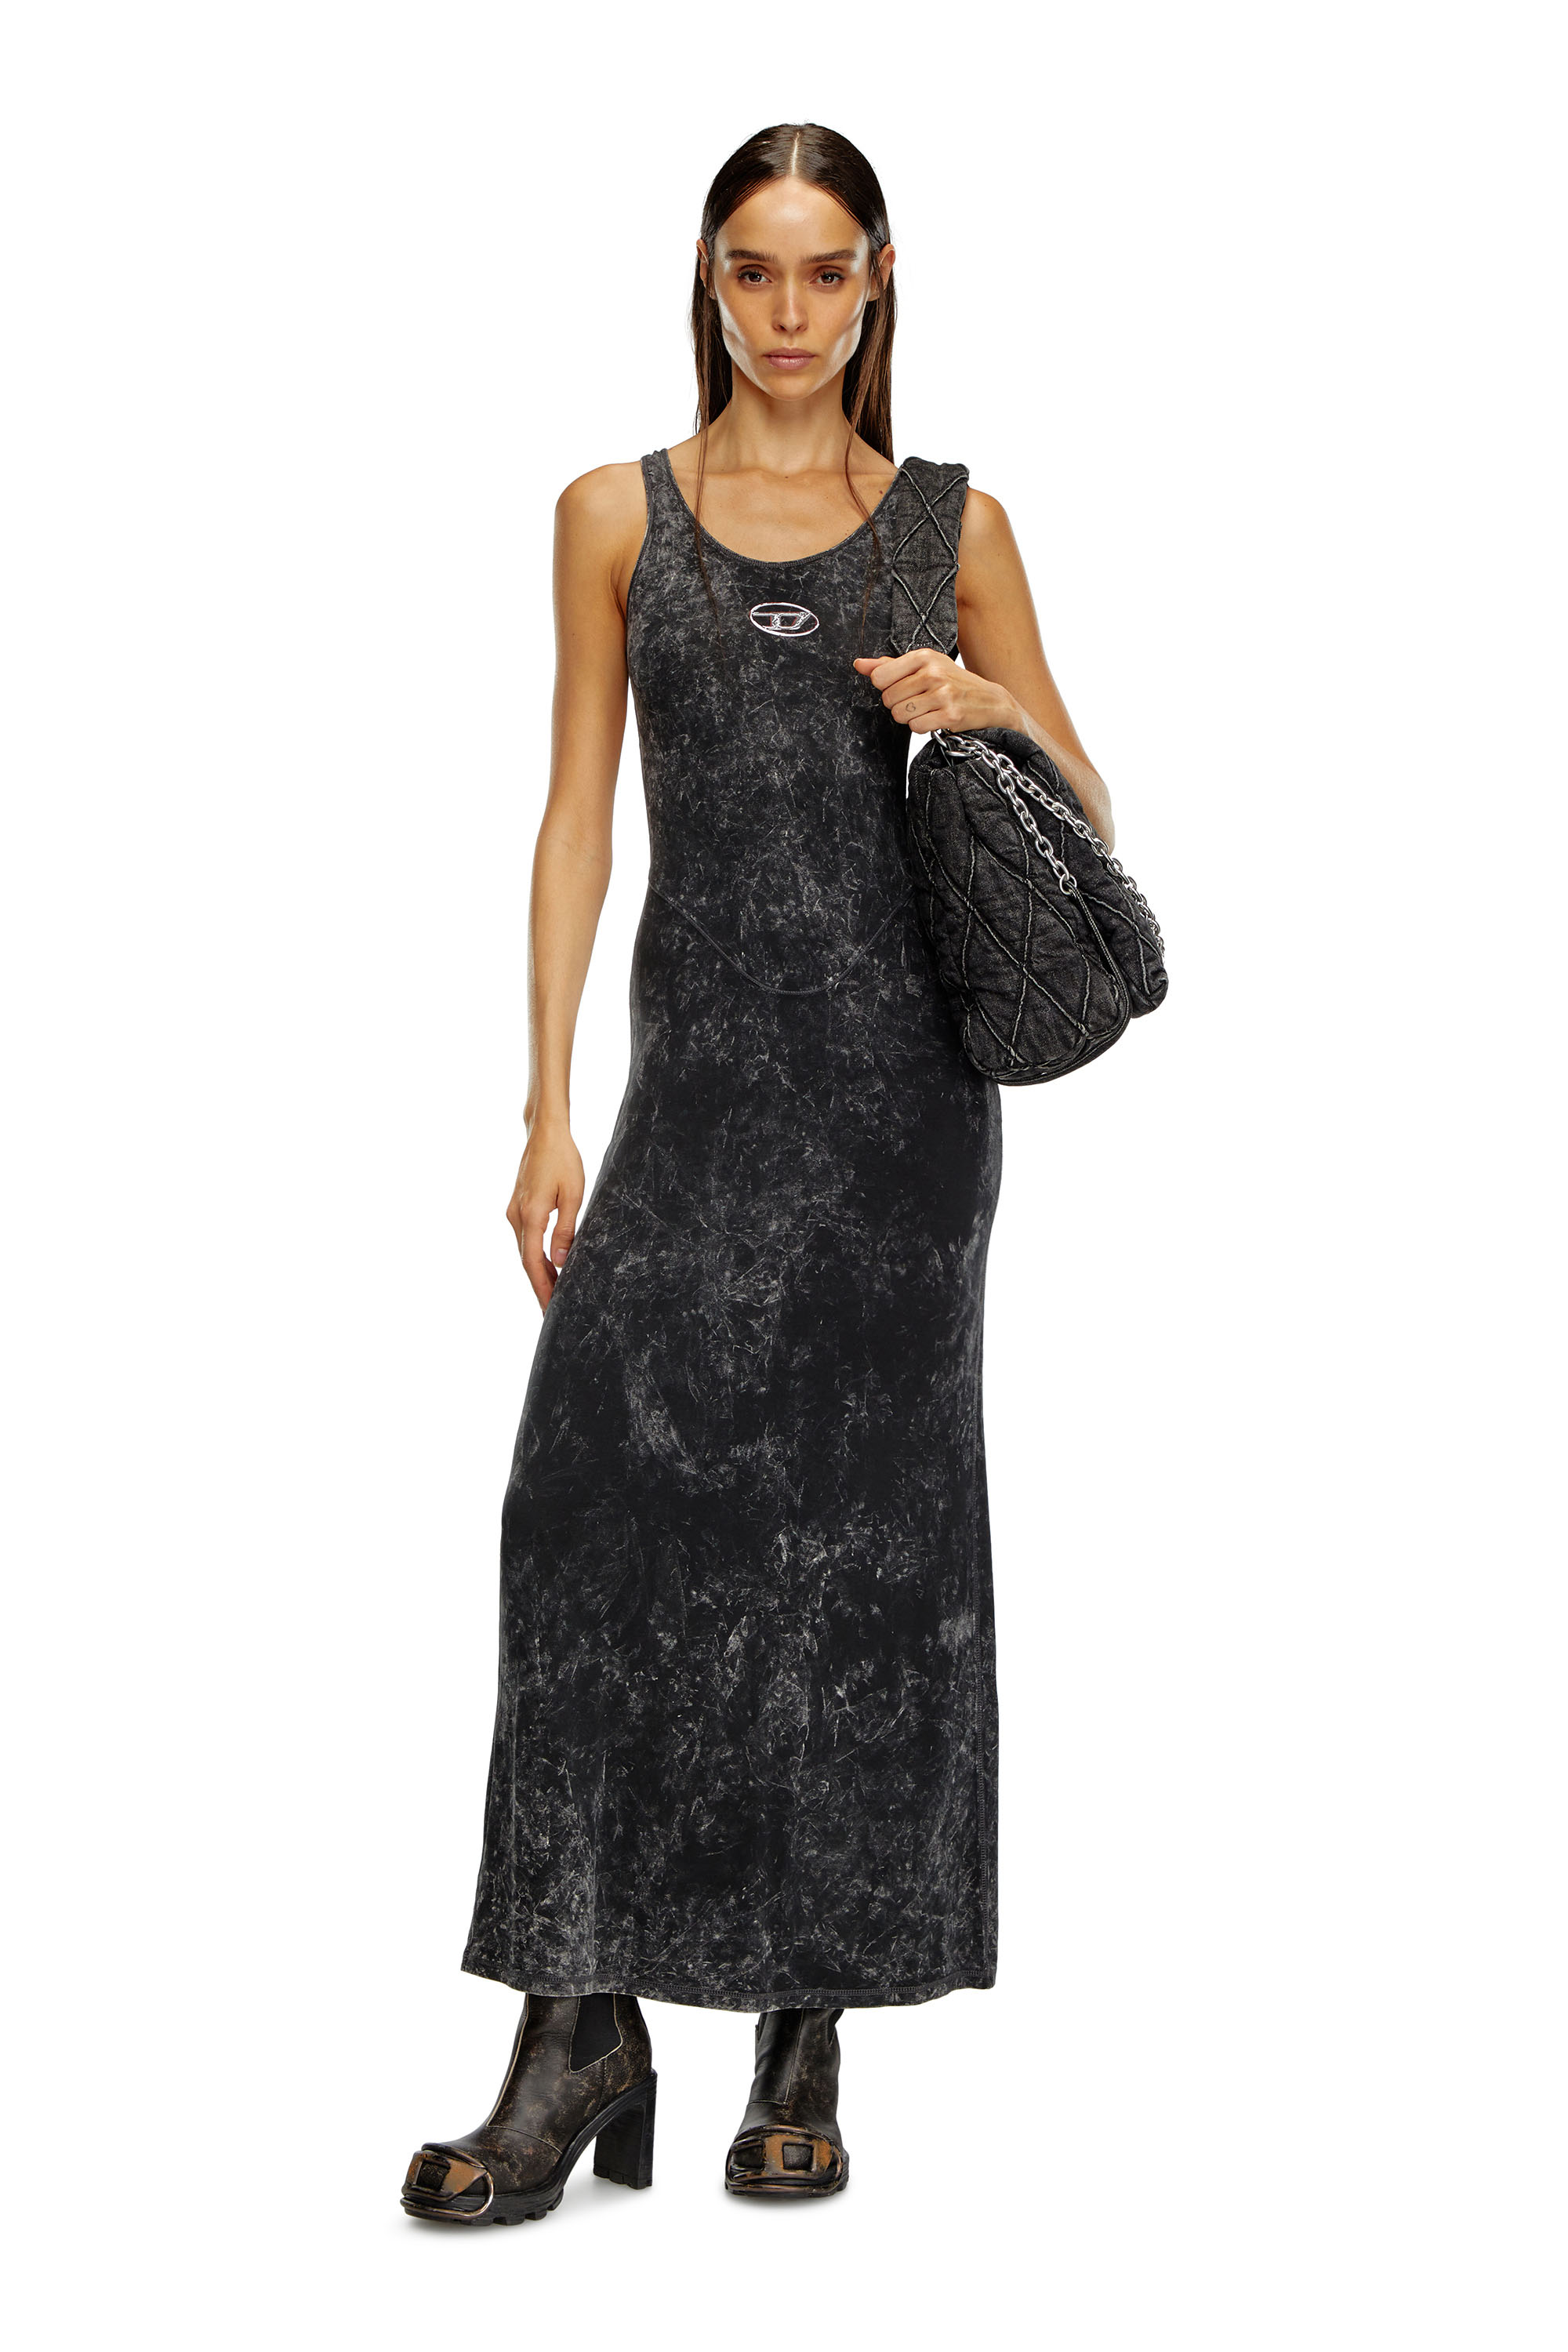 Diesel - D-AVENA-P1, Female Maxi dress in marbled stretch jersey in ブラック - Image 1